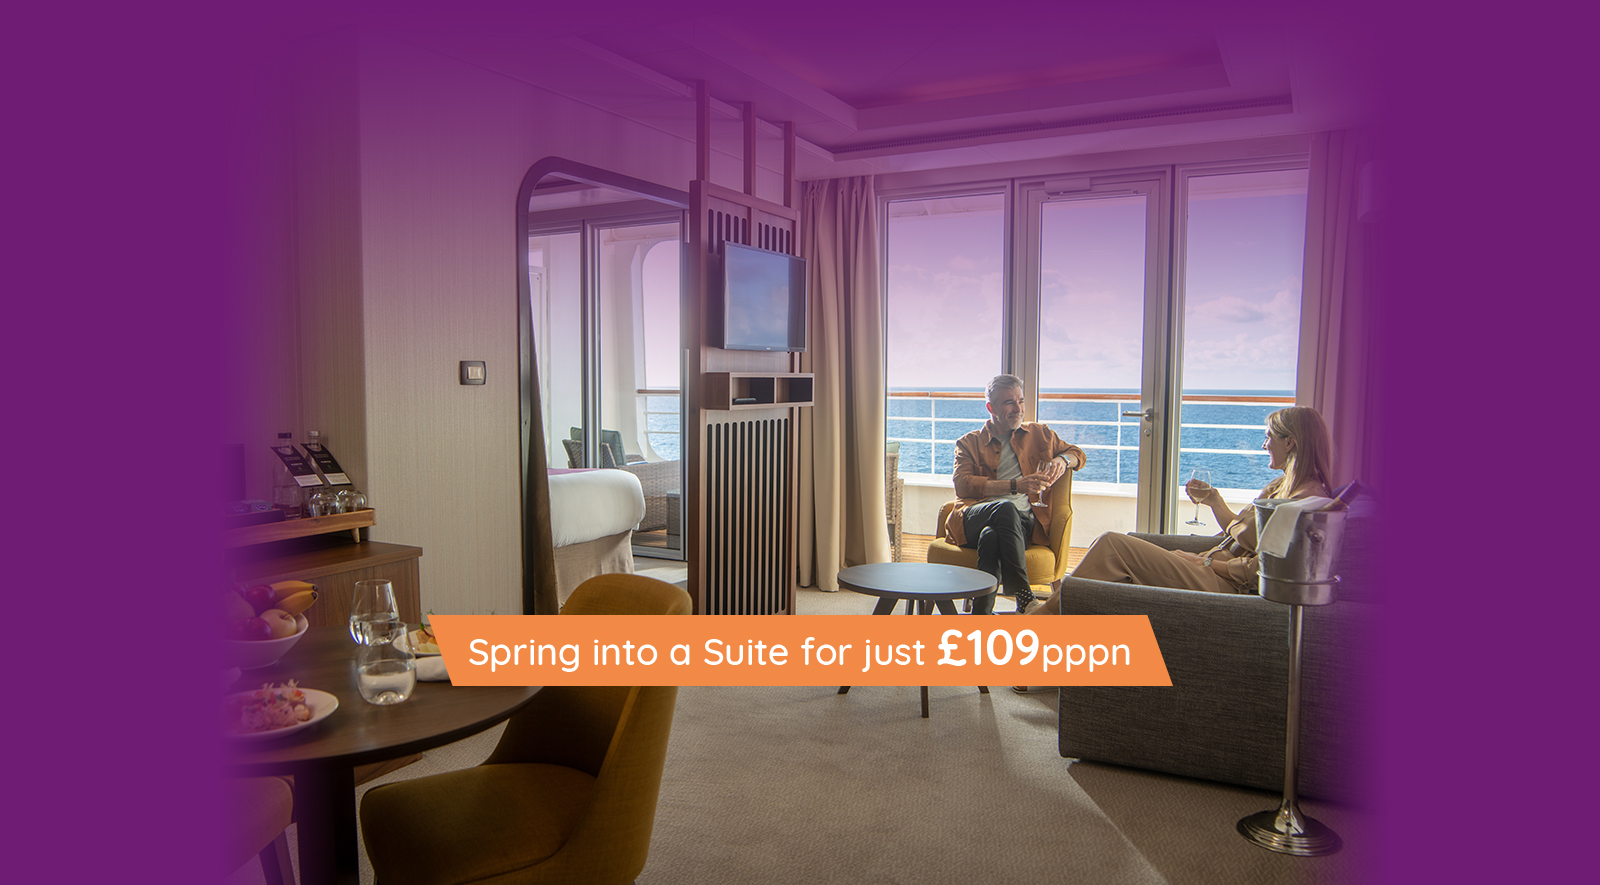 Spring into a Suite for just £109pppn